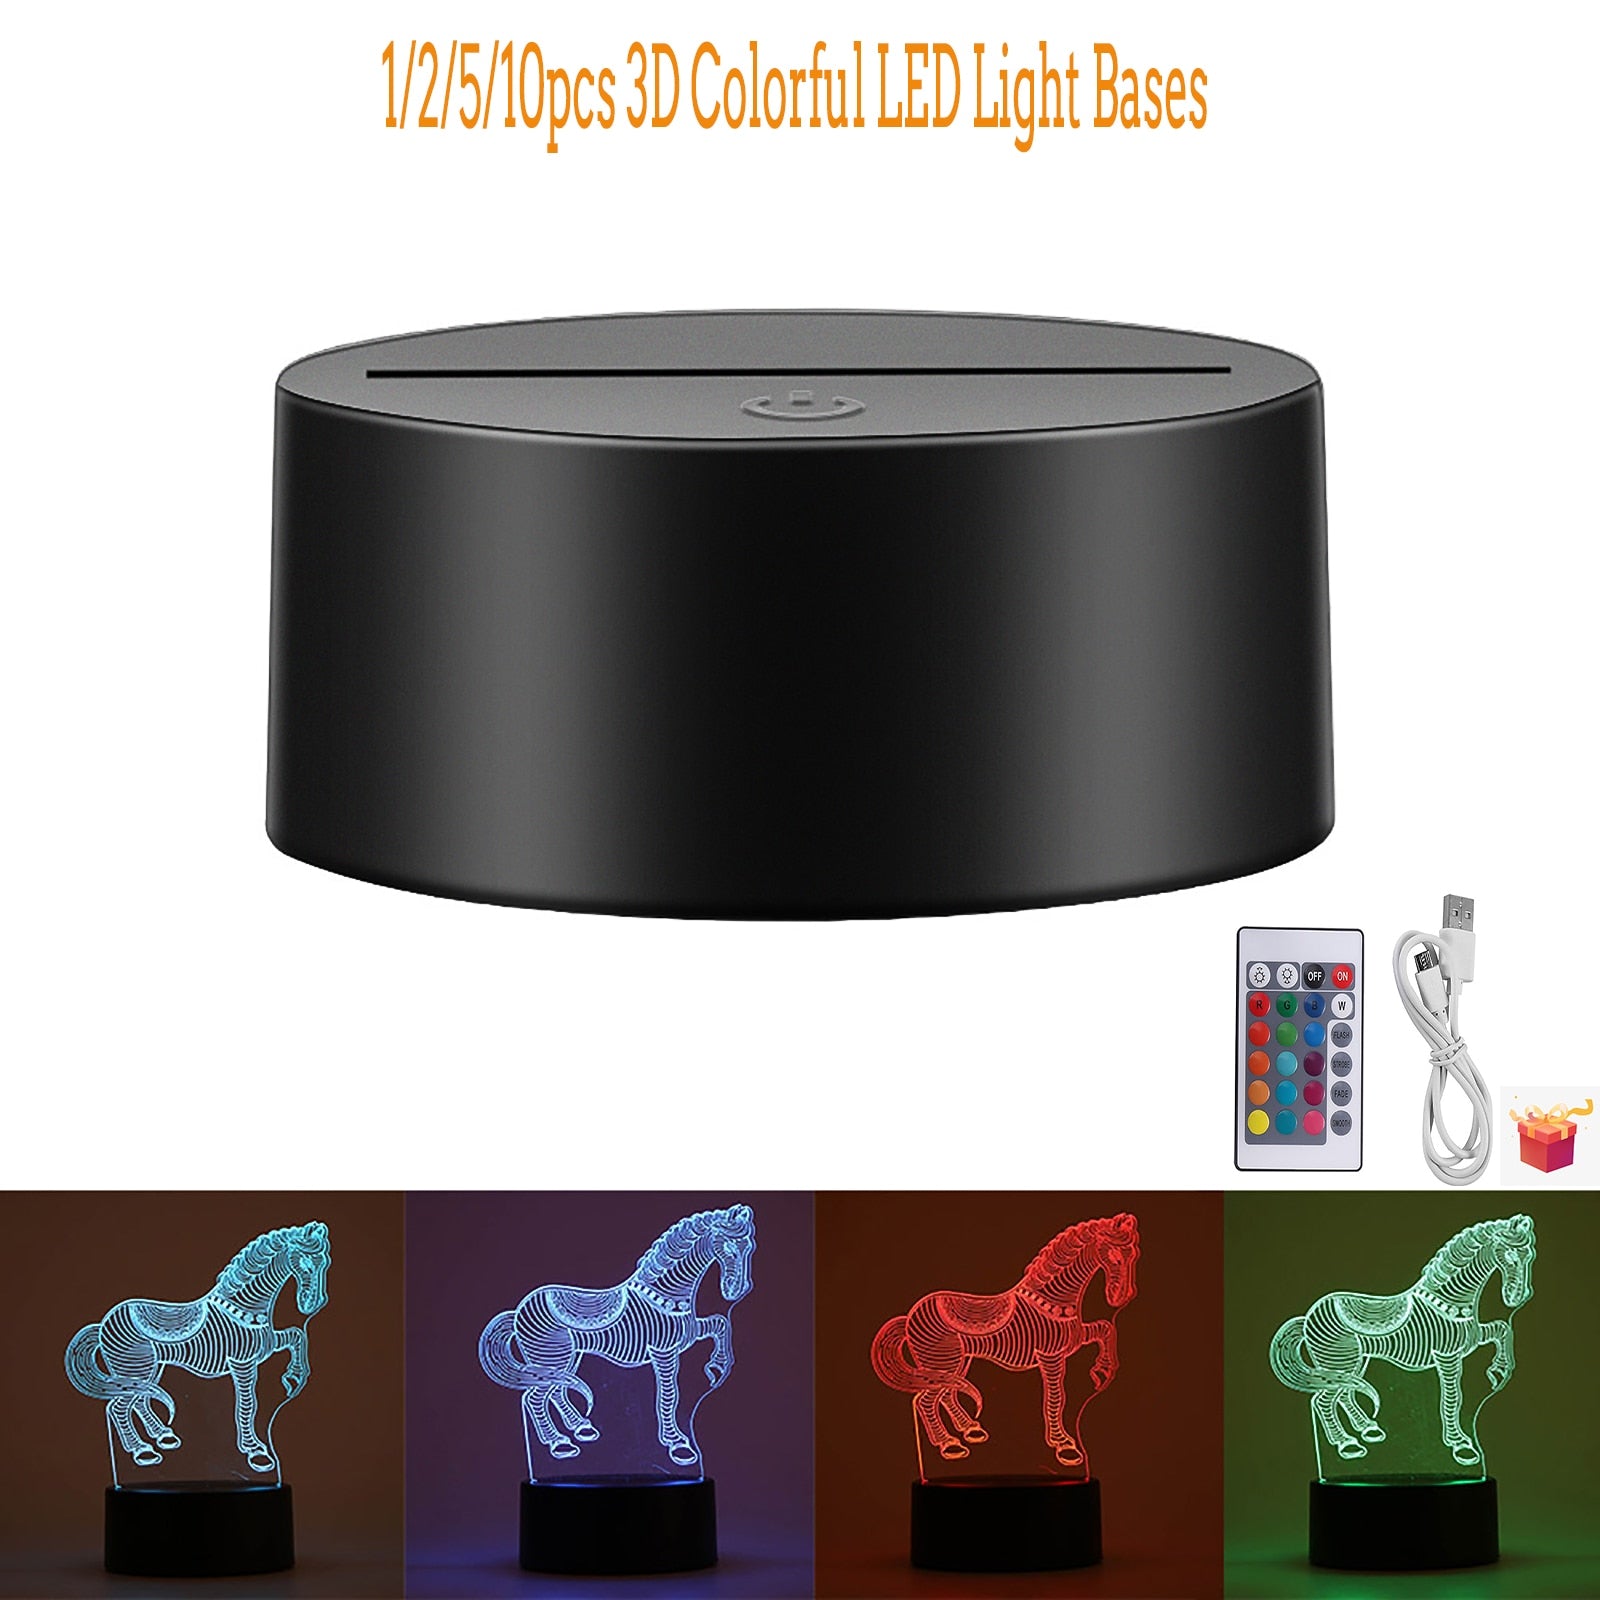 USB Cable 1/2/5/10PC Touch 3D LED Light Holder Lamp Base Night Light Replacement 7 Color Colorful Light Bases Table Decor Holder